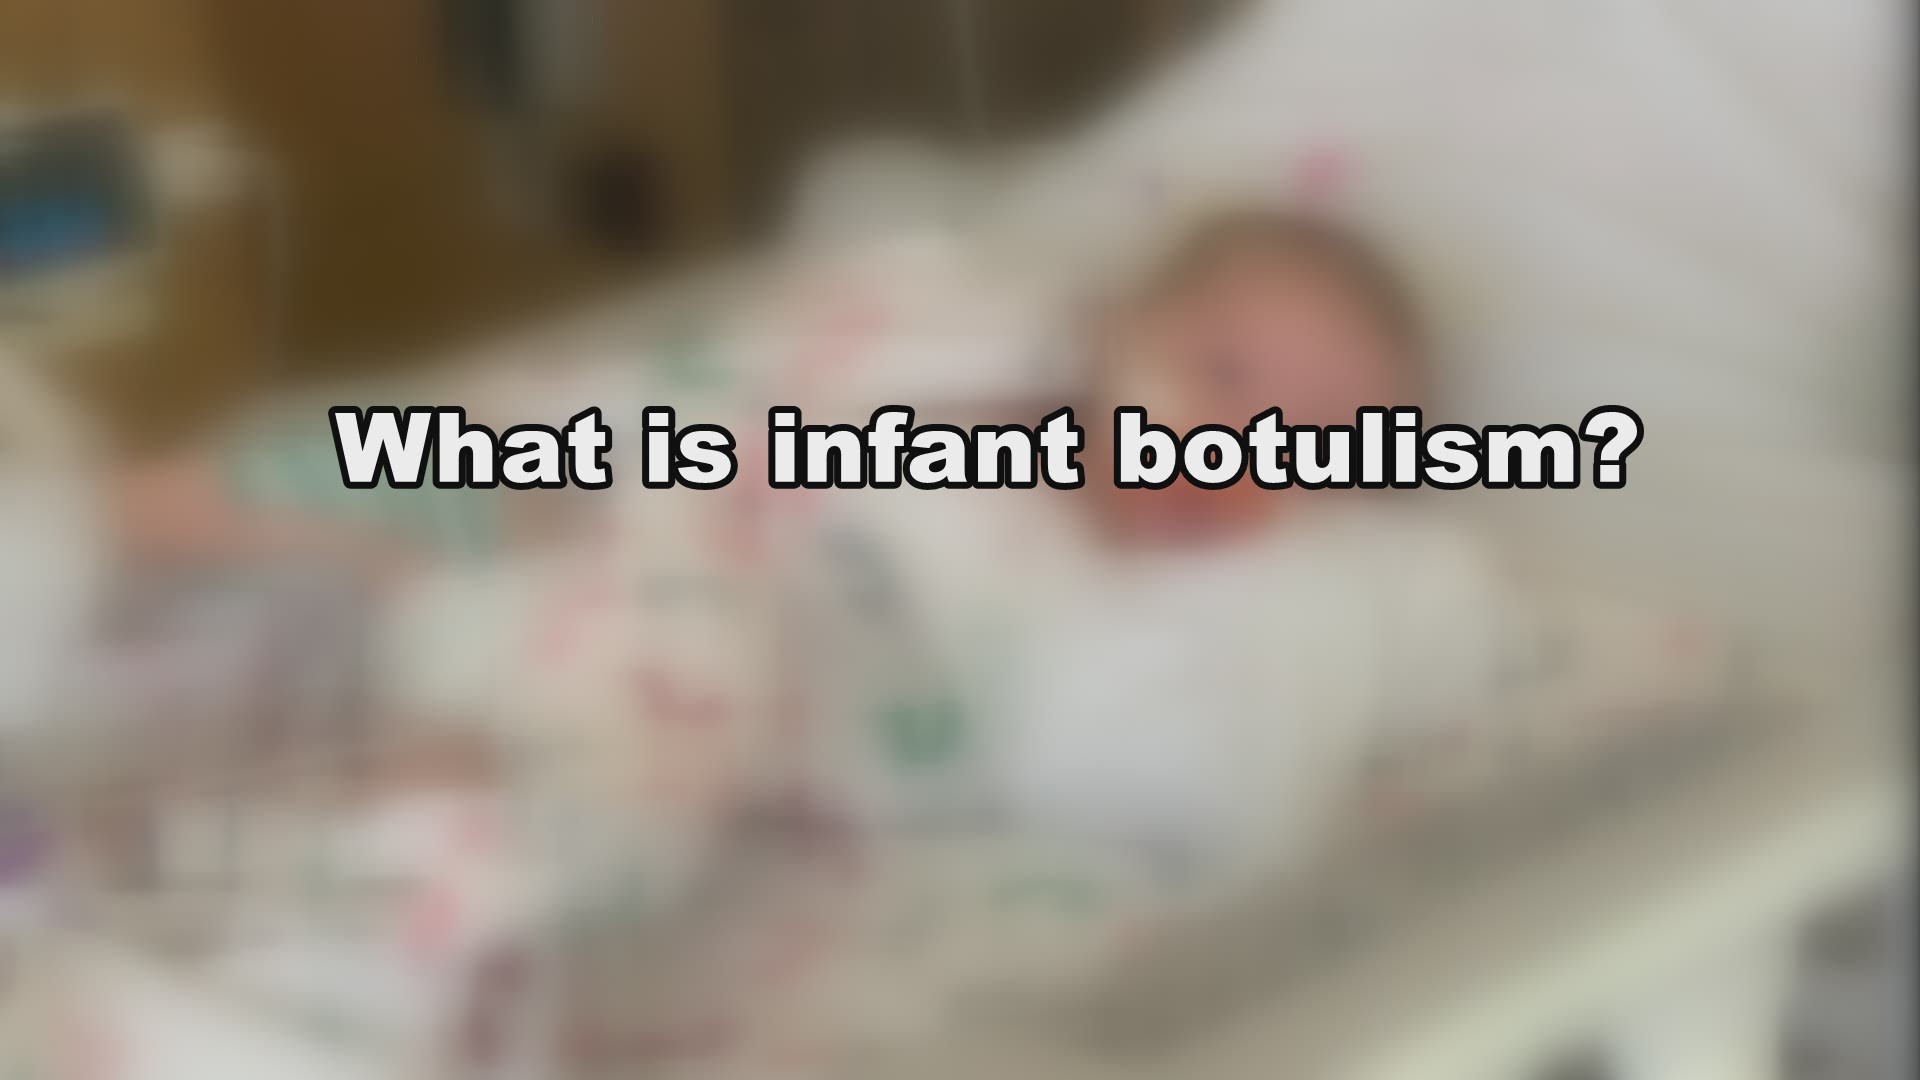 Dr. Richard Wallace of UT Health answers questions on infant botulism.